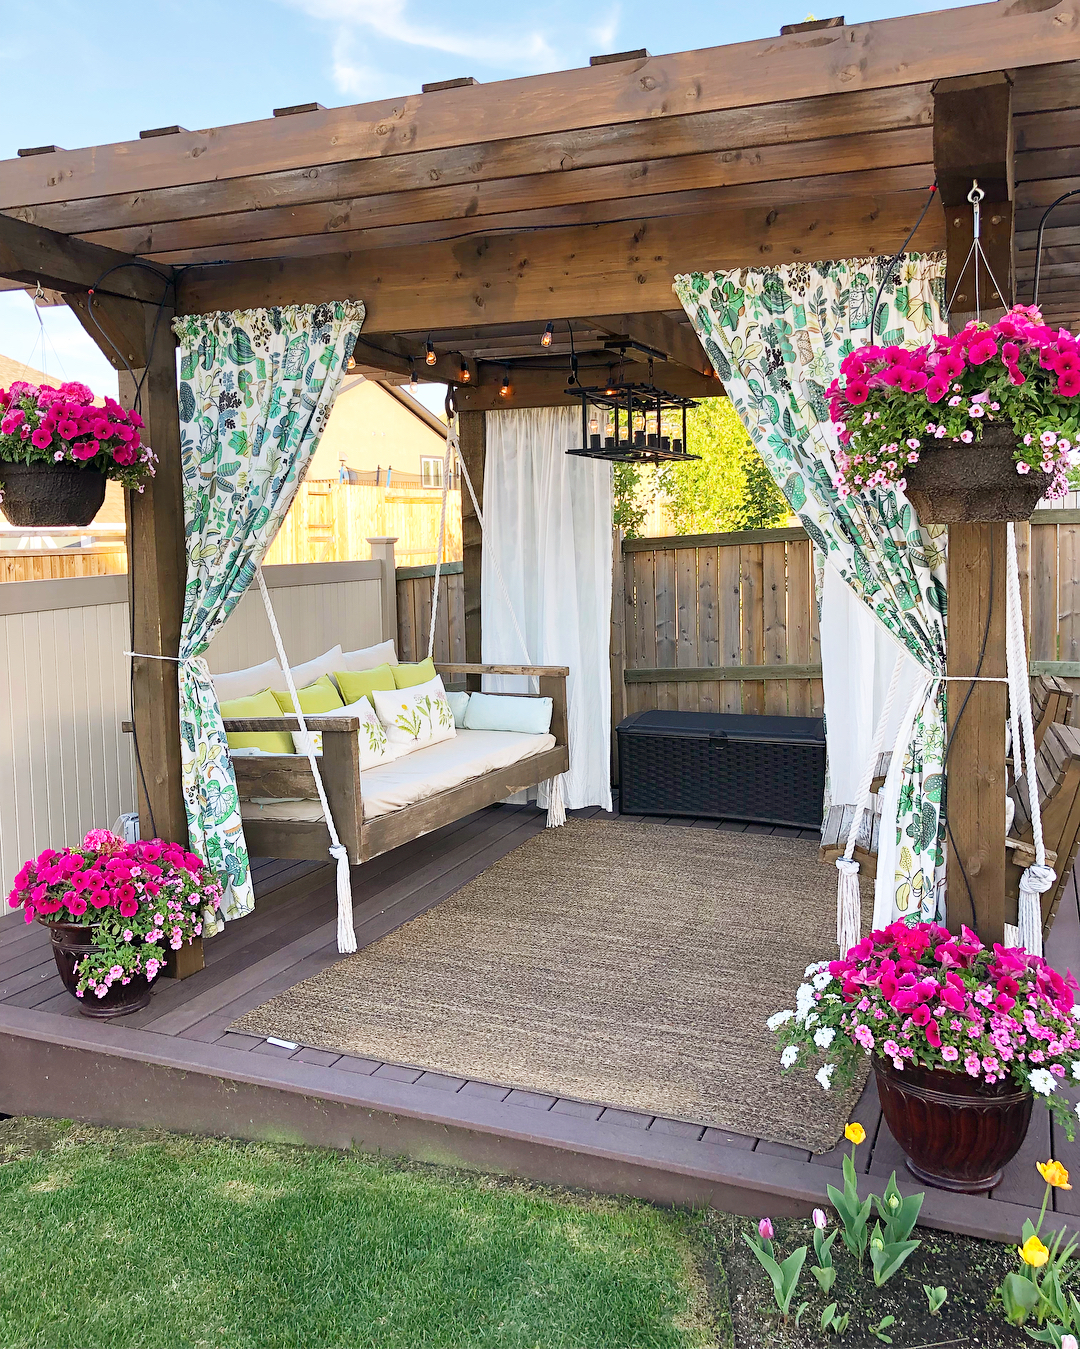 Pergola draped with floral curtains and pink flowers. Photo by Instagram user @wainwrighthousetohome